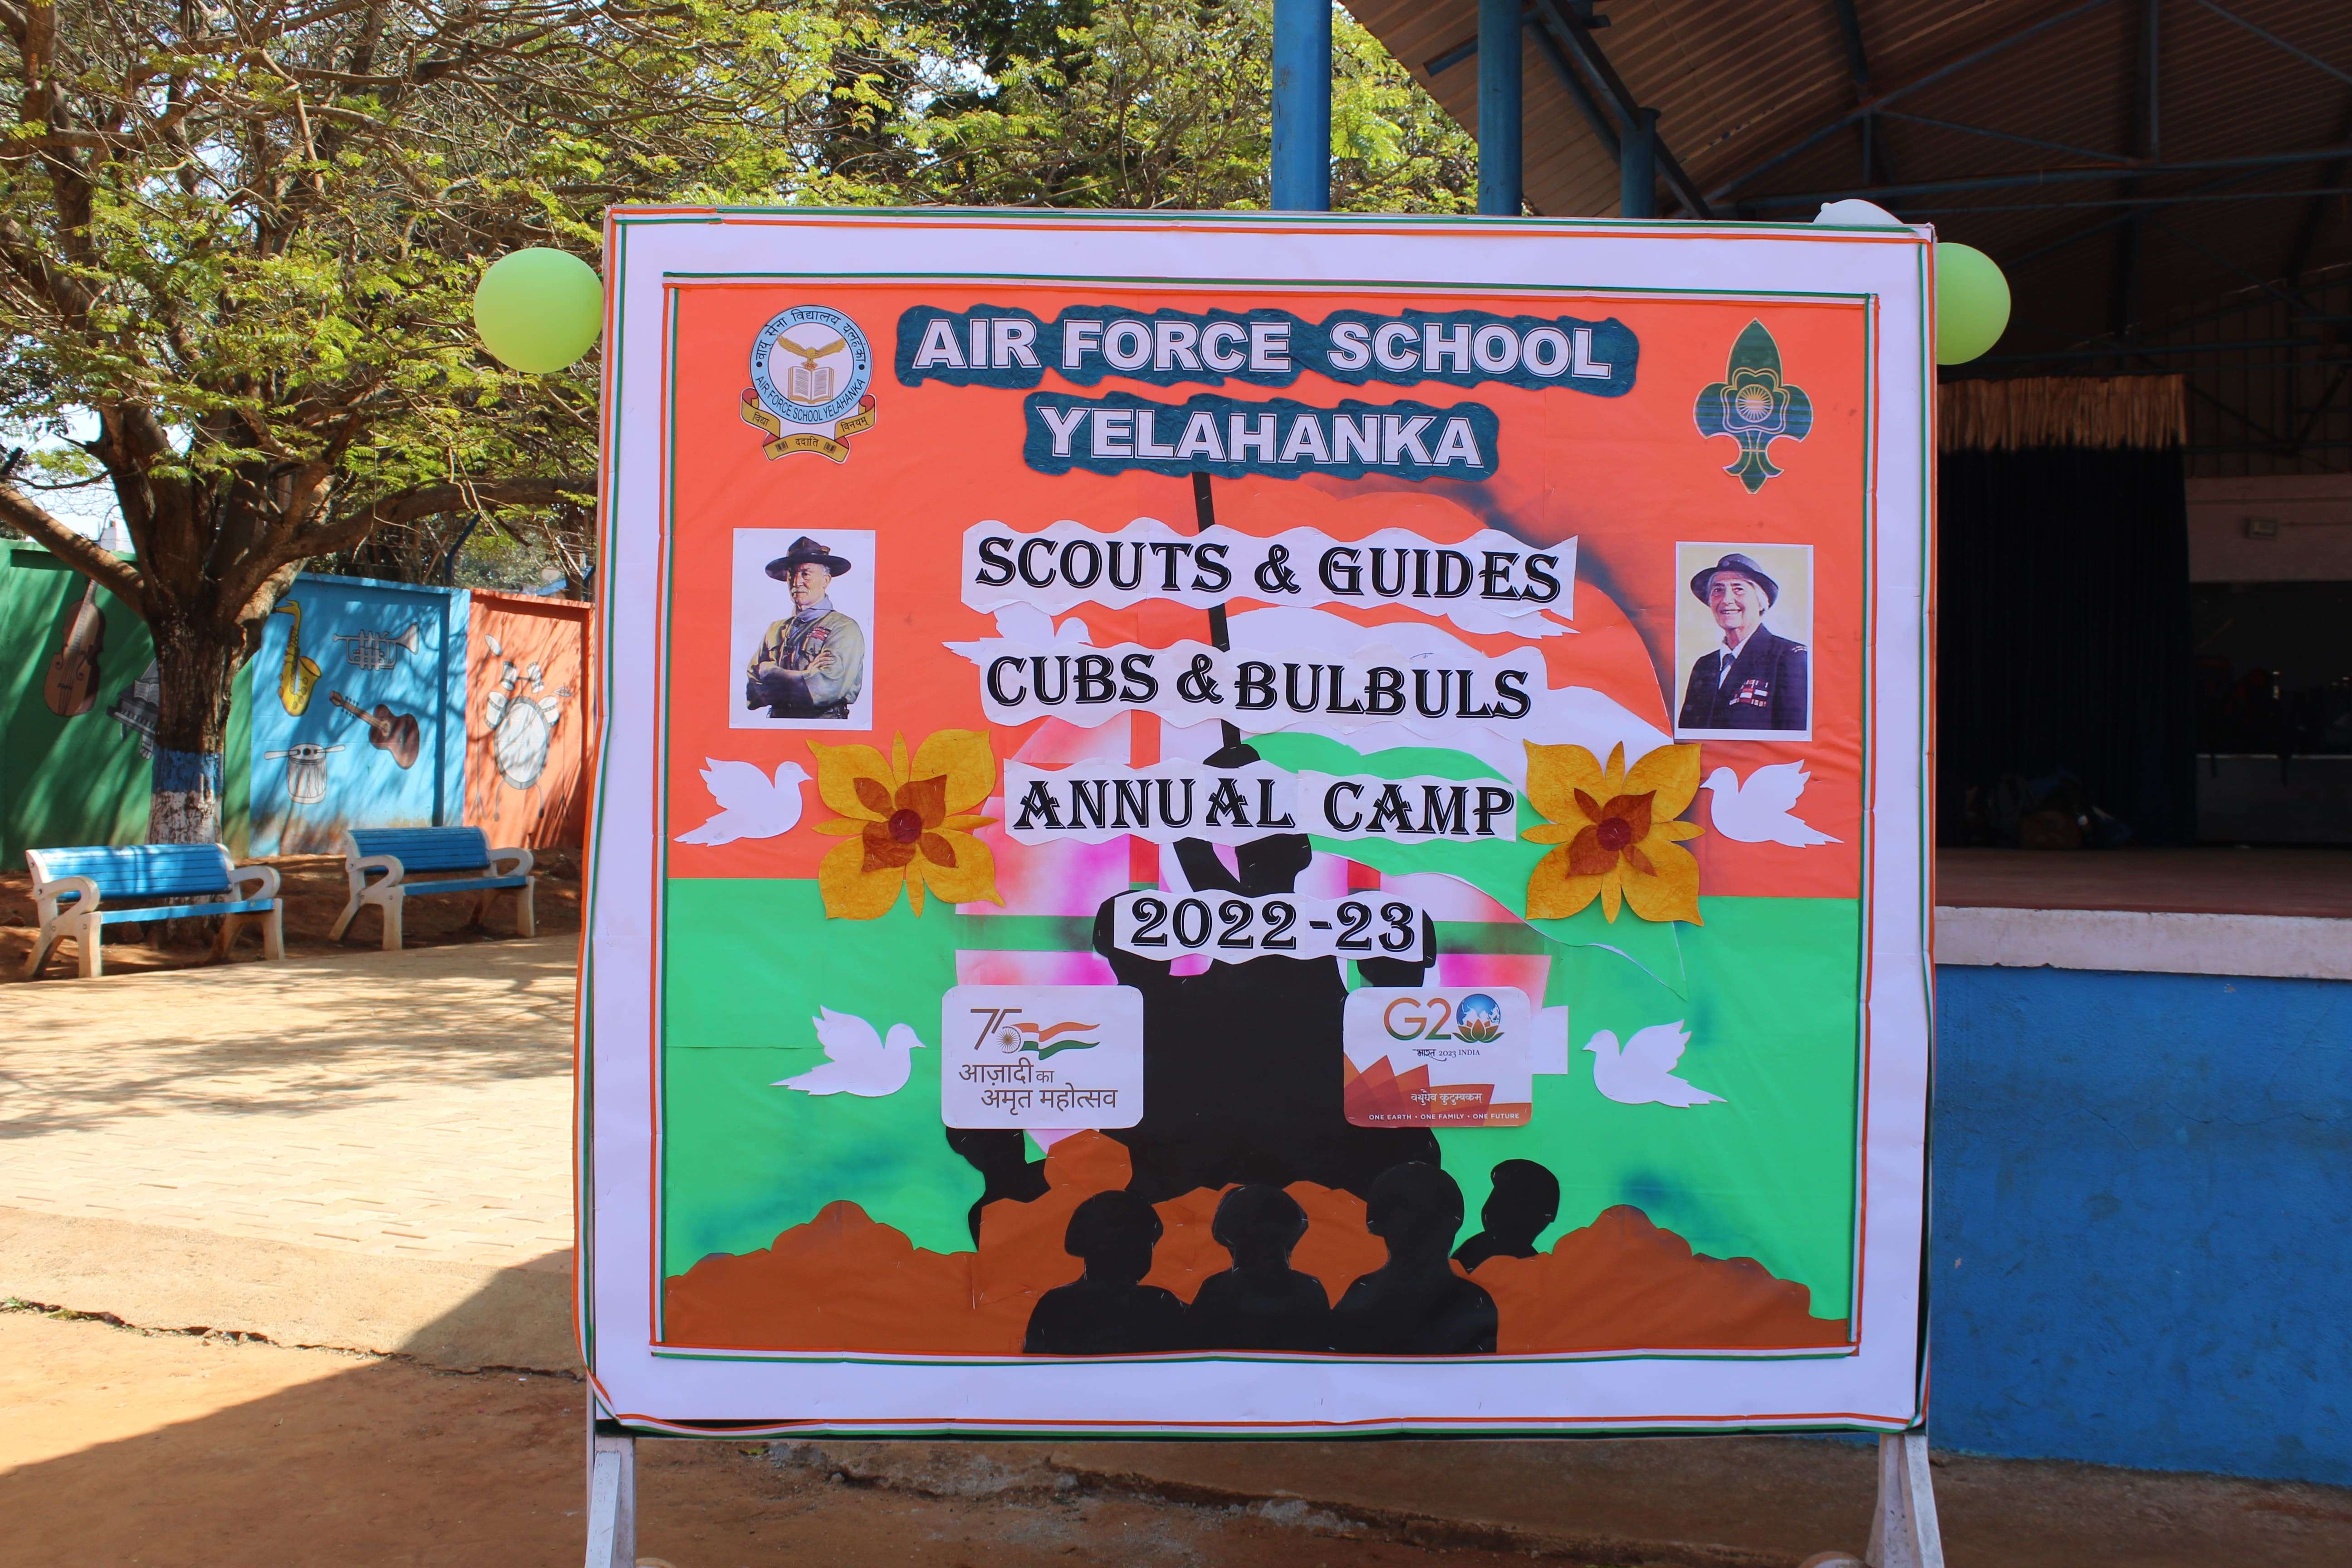 Scouts and Guides Annual Camp 2022- 23 - Airforce School Yelahanka